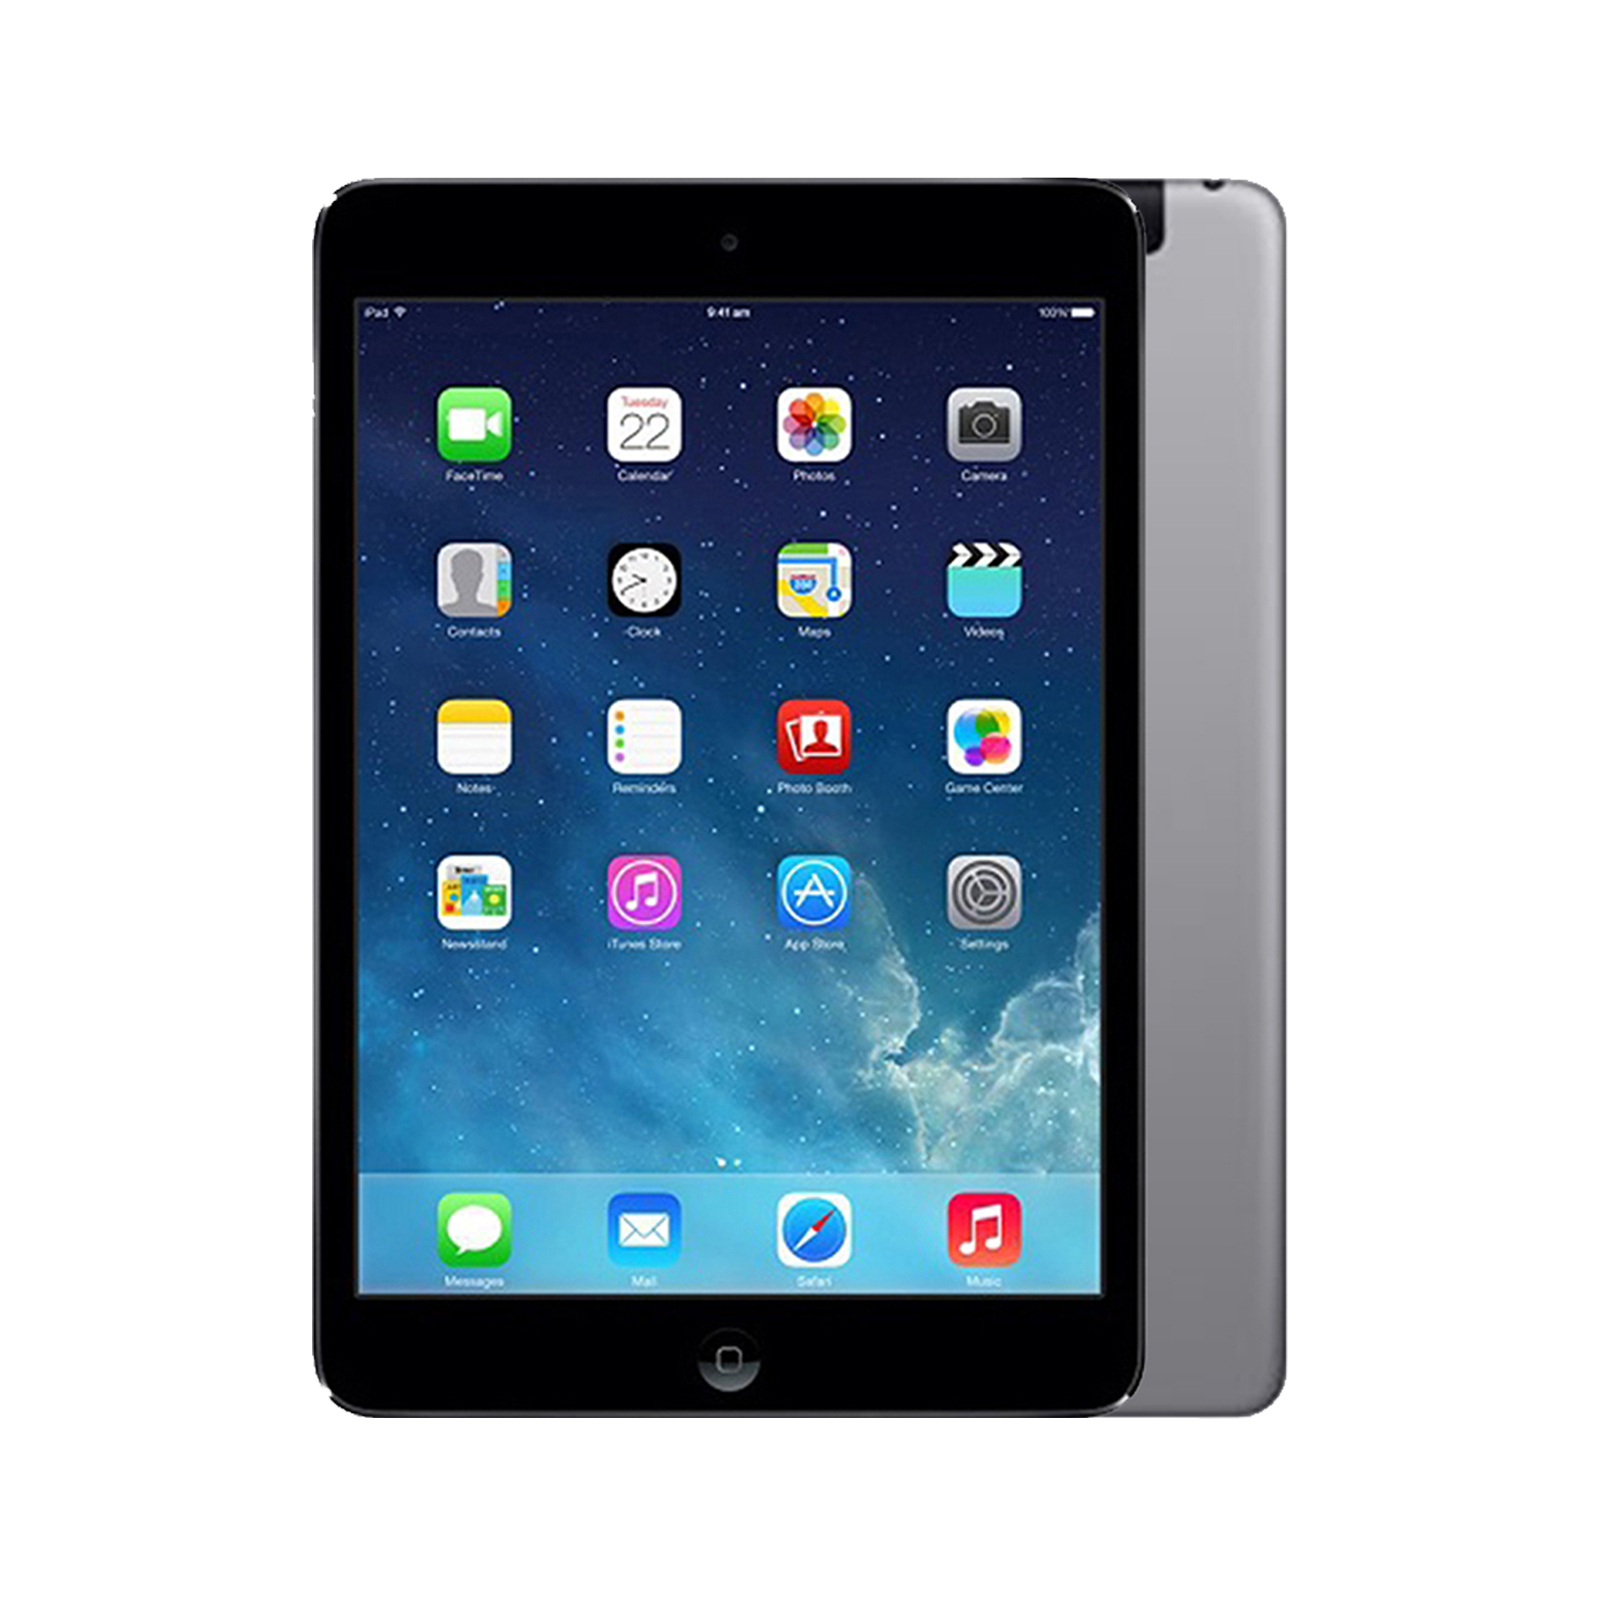 Apple iPad Air 1 (Wi-Fi + Cellular) 128GB Space Grey - Excellent